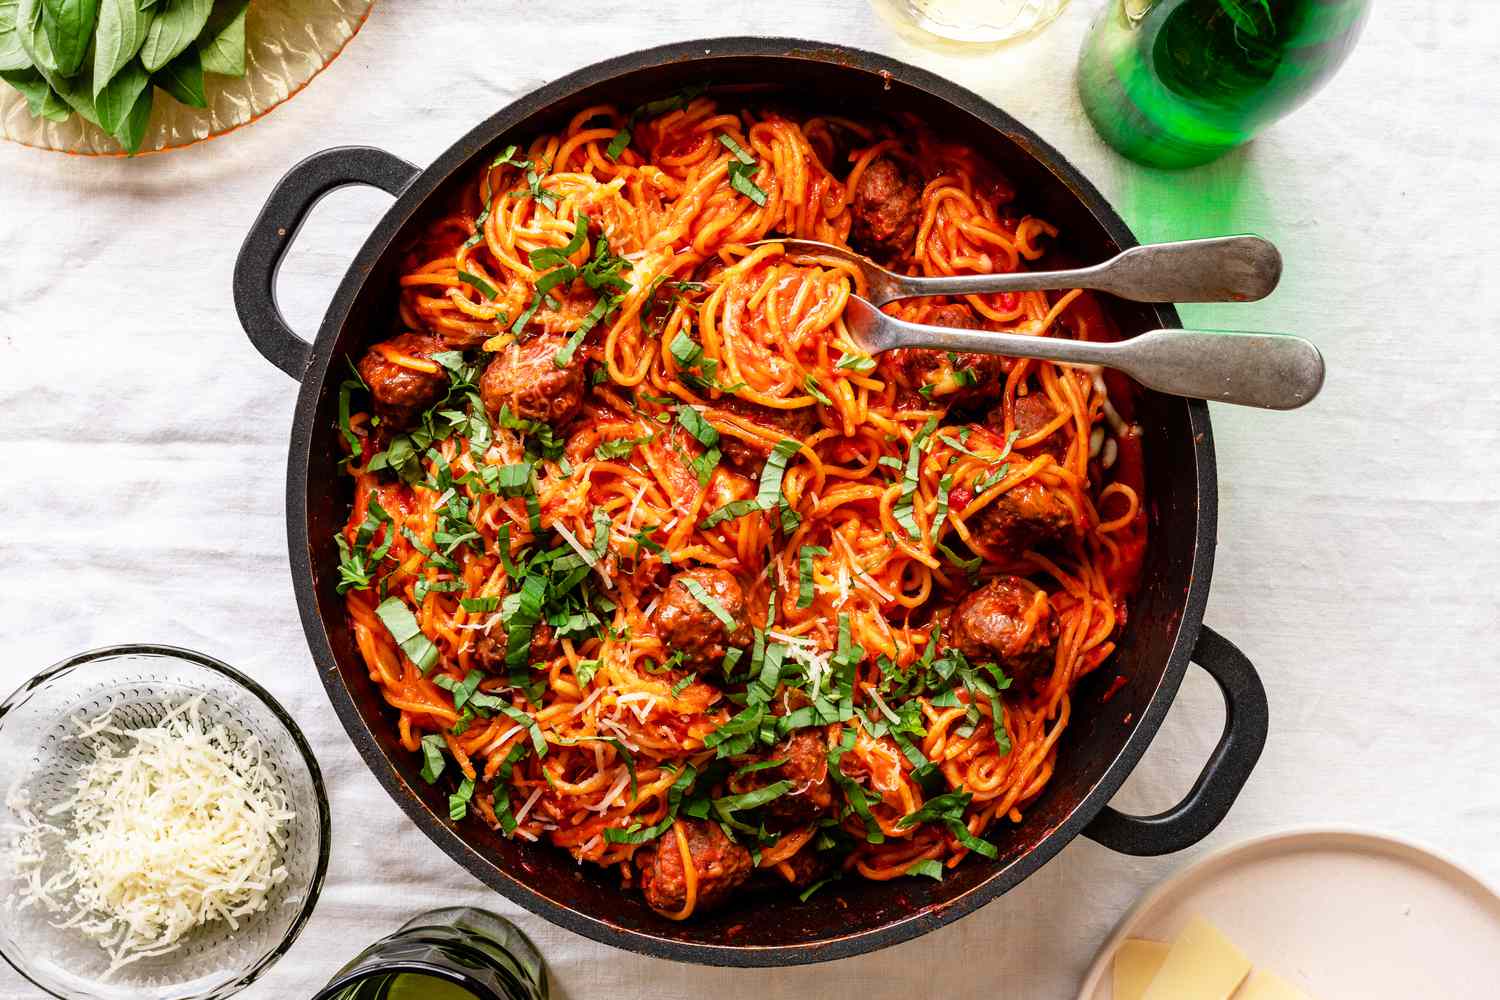 https://storables.com/wp-content/uploads/2023/07/how-to-cook-pasta-in-electric-skillet-1690273422.jpg